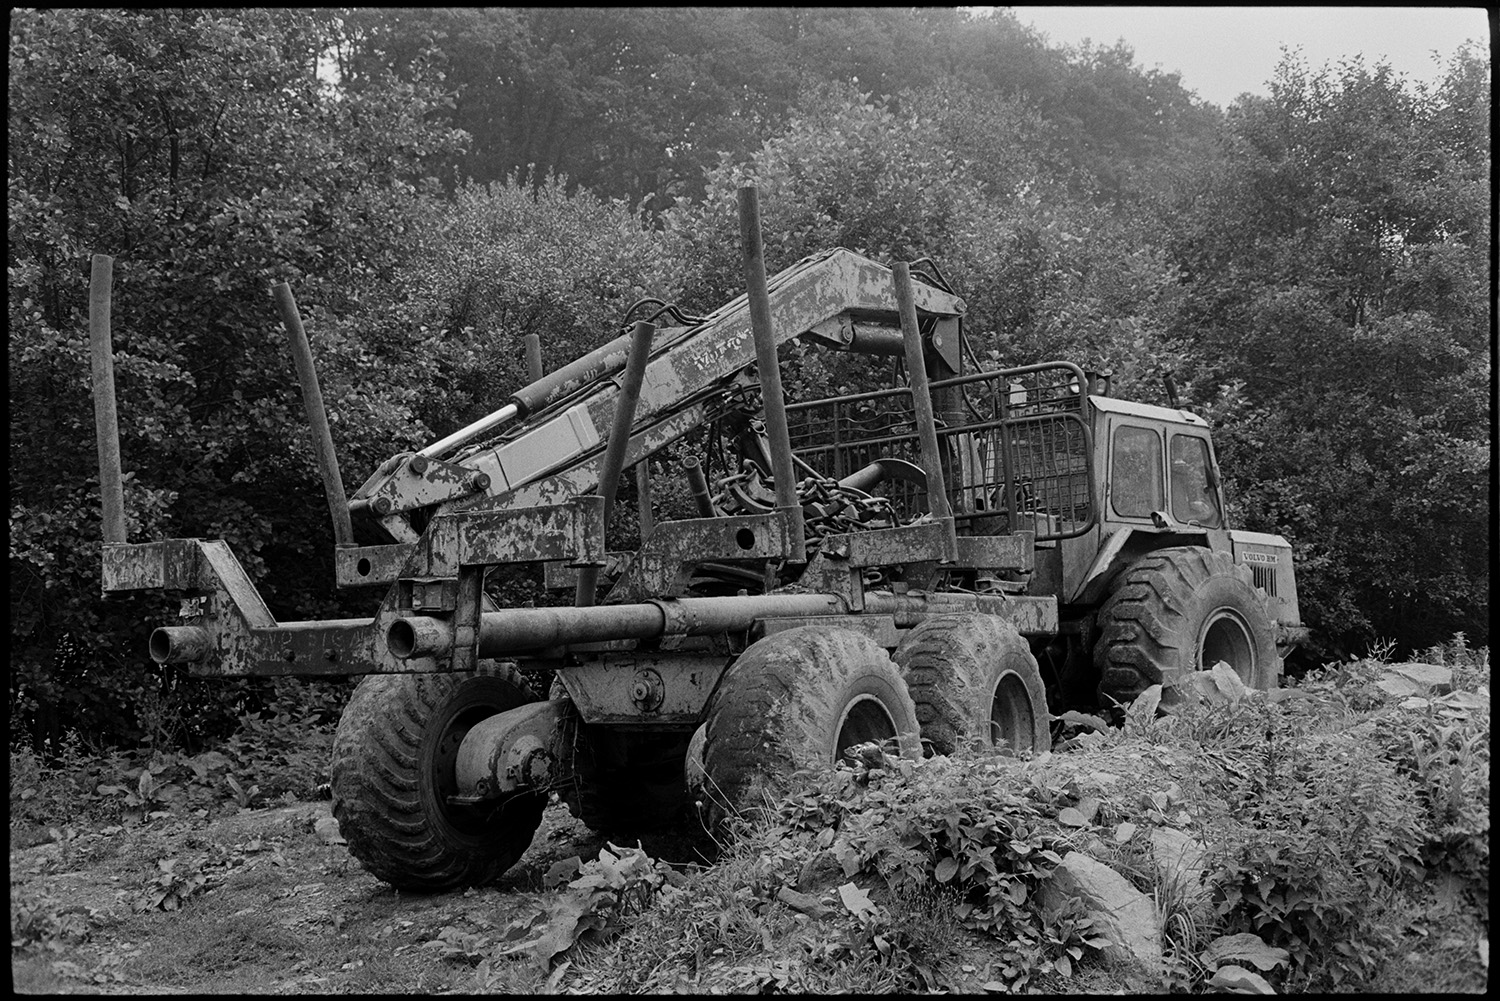 Tree felling machine parked beside road, with goat, tractor.
[A tree felling machine parked by a wooded area at Millhams, Dolton.]